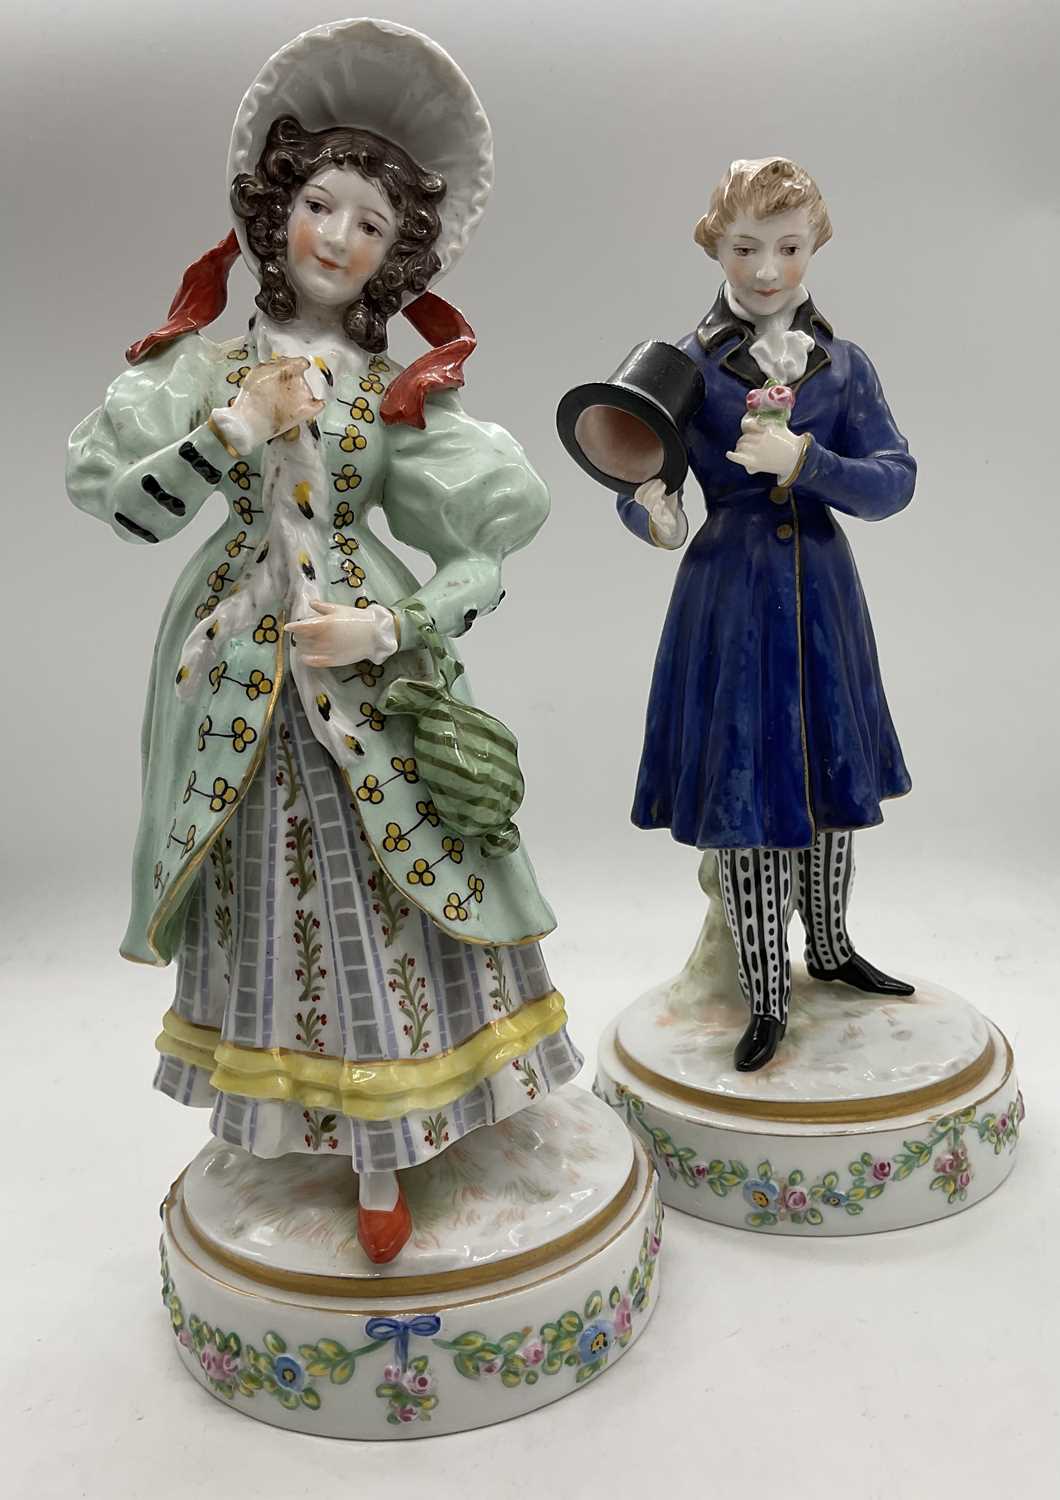 KARL ENS; a porcelain figure of a young woman wearing elaborate clothing and a bonnet, painted and